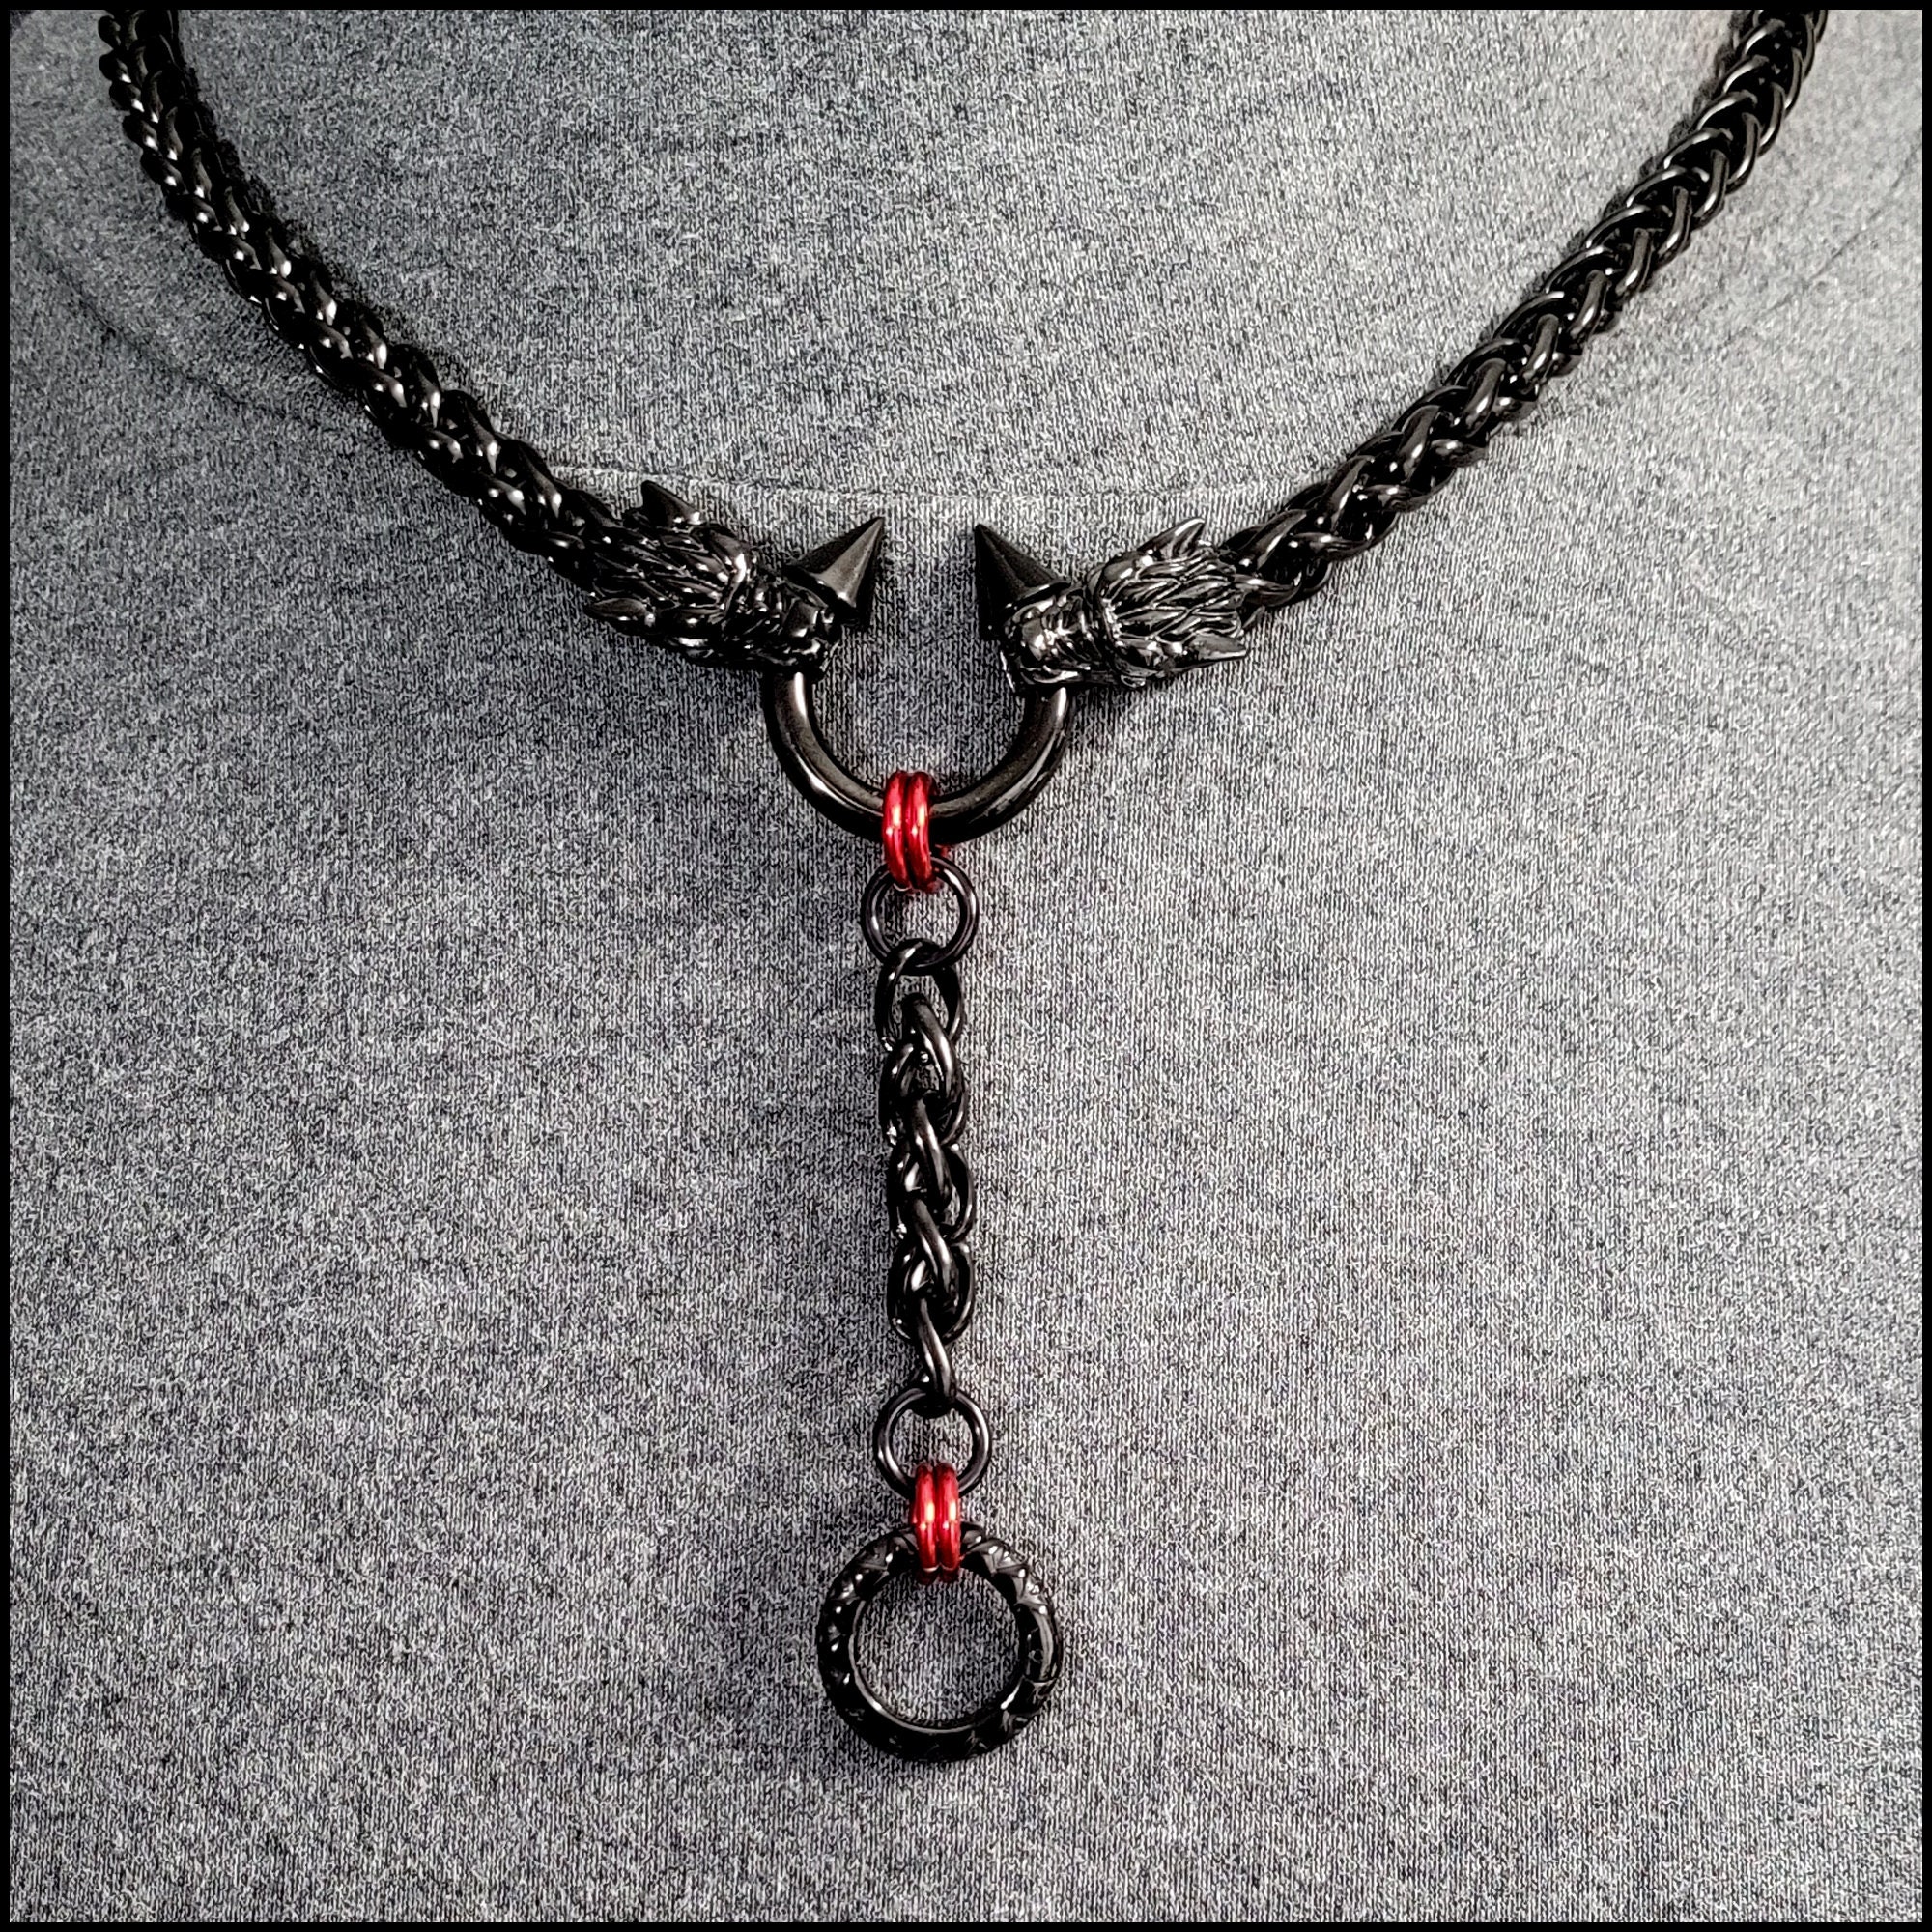 Black string necklace with a steel pendant - big shiny grain